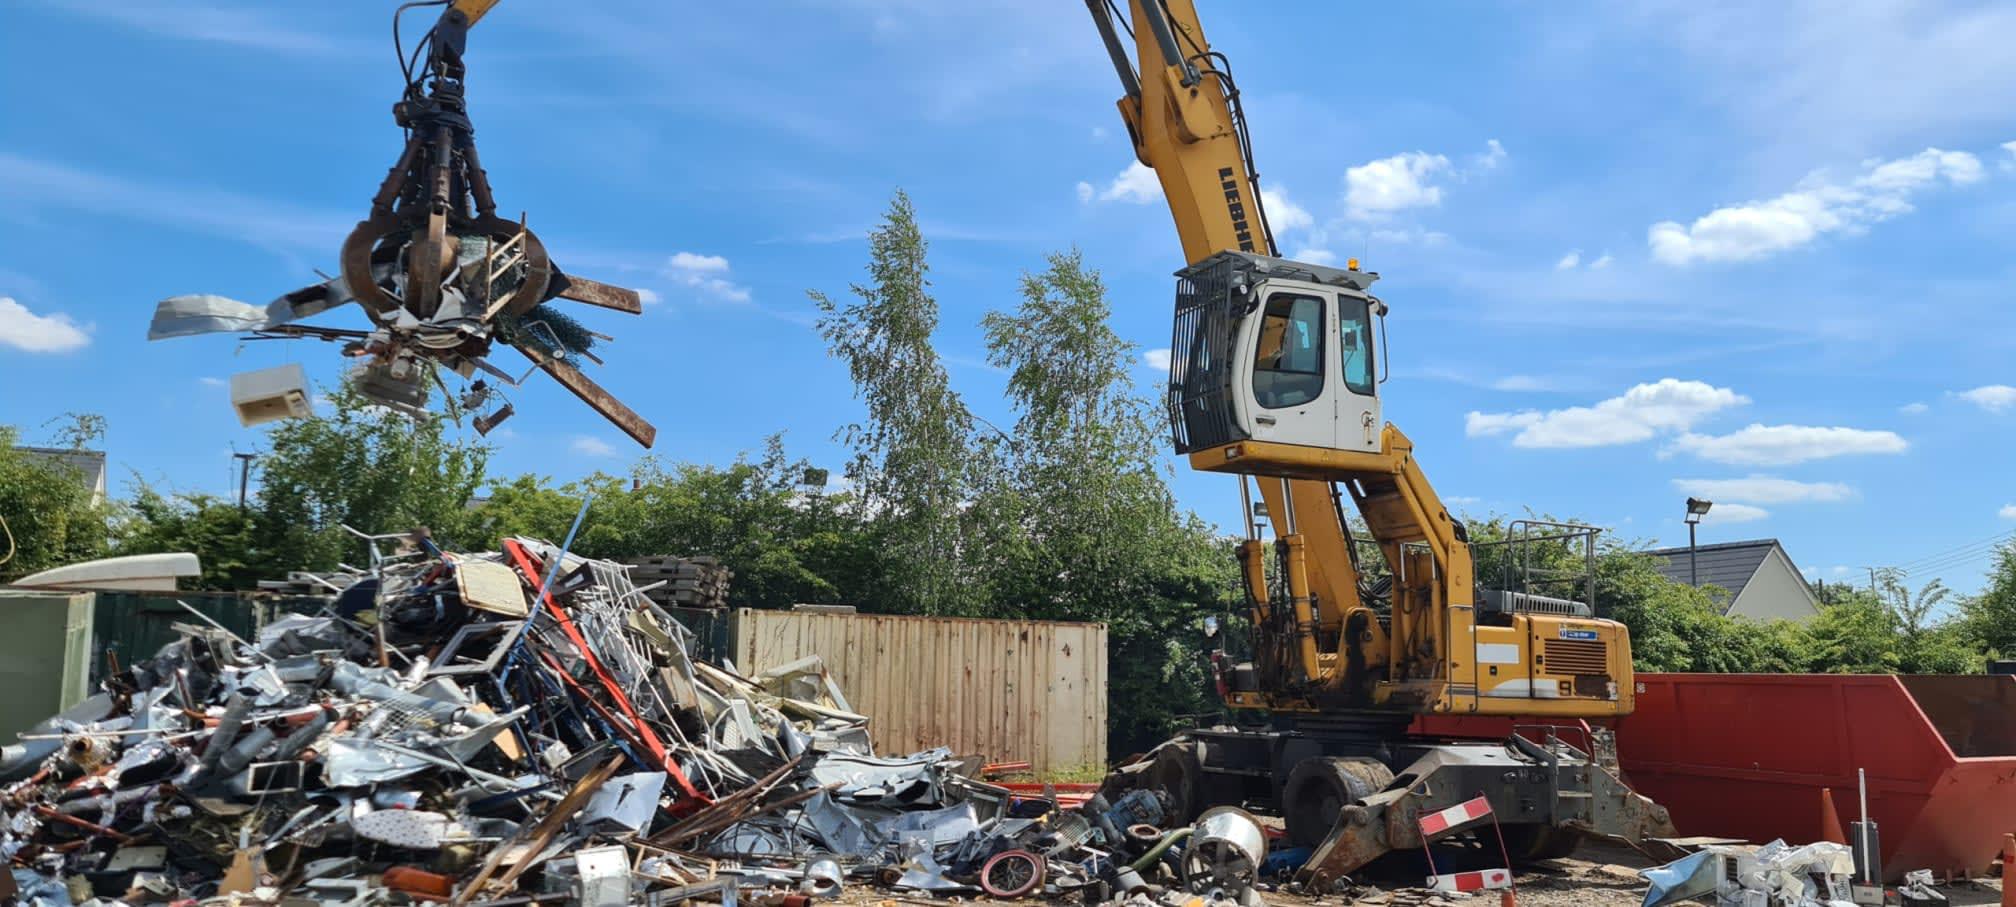 Images Commercial Metal Recycling Ltd